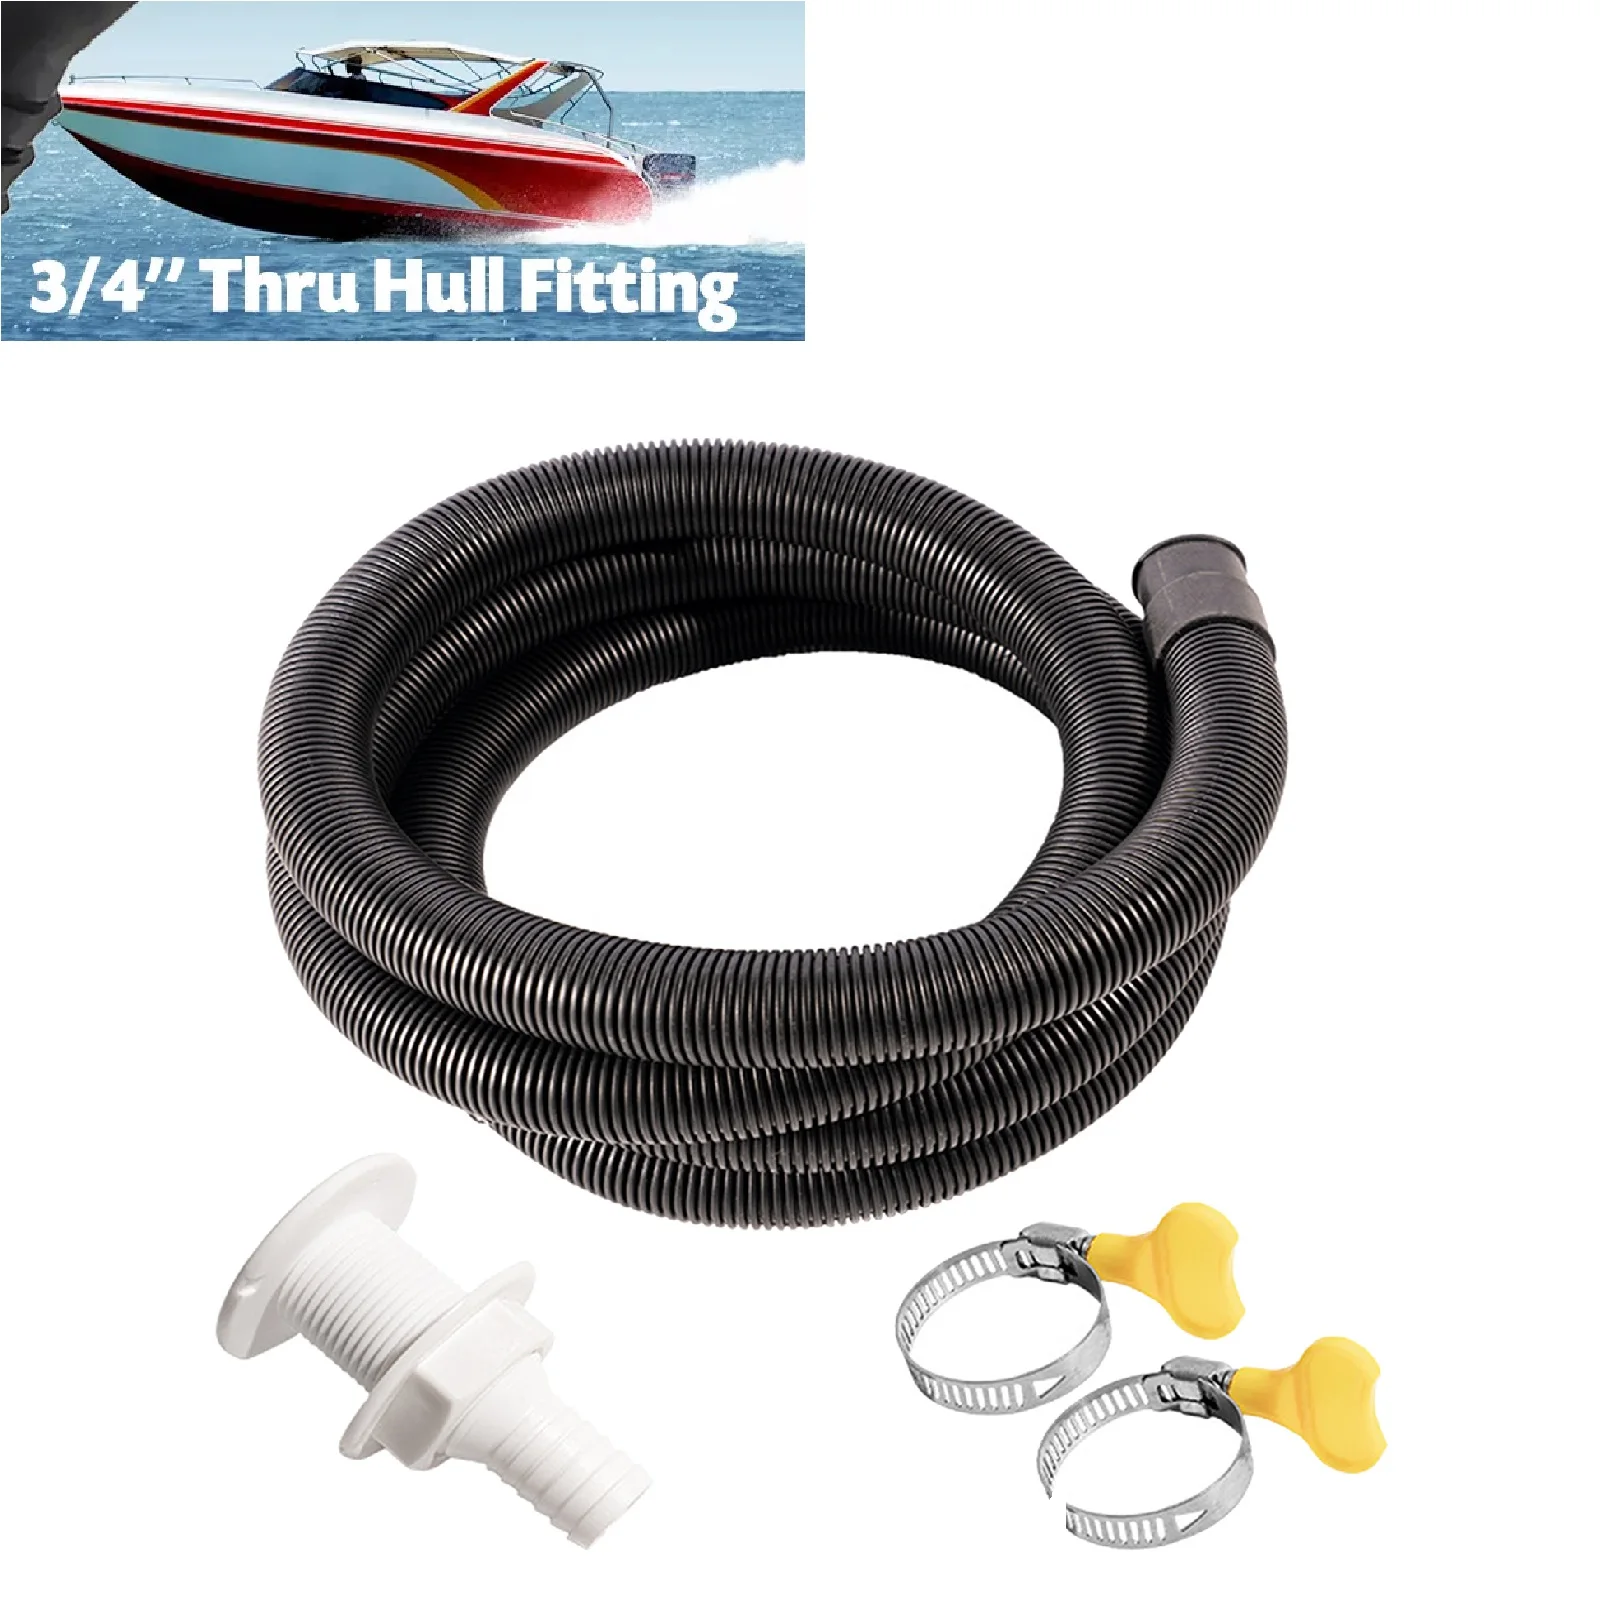 Flexible Bilge Pump Hose Installation Kit 3/4-Inch Diameter 6.6 FT for Boats with 2 Clamps and Thru-Hull Fitting 1920 1080p usb endoscope camera for android phone laptop with 8mm lens flexible cable type c endoscope inspect borescope